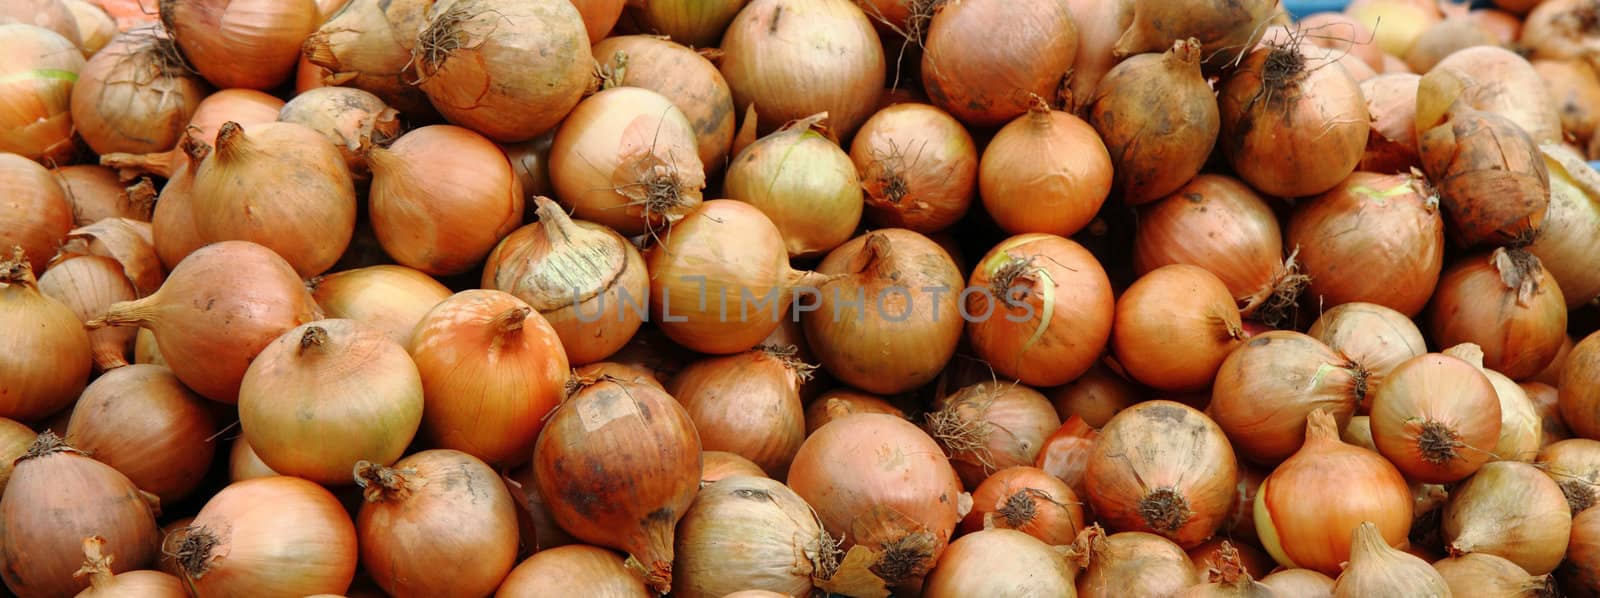 onion from small home farm as nice vegetable background